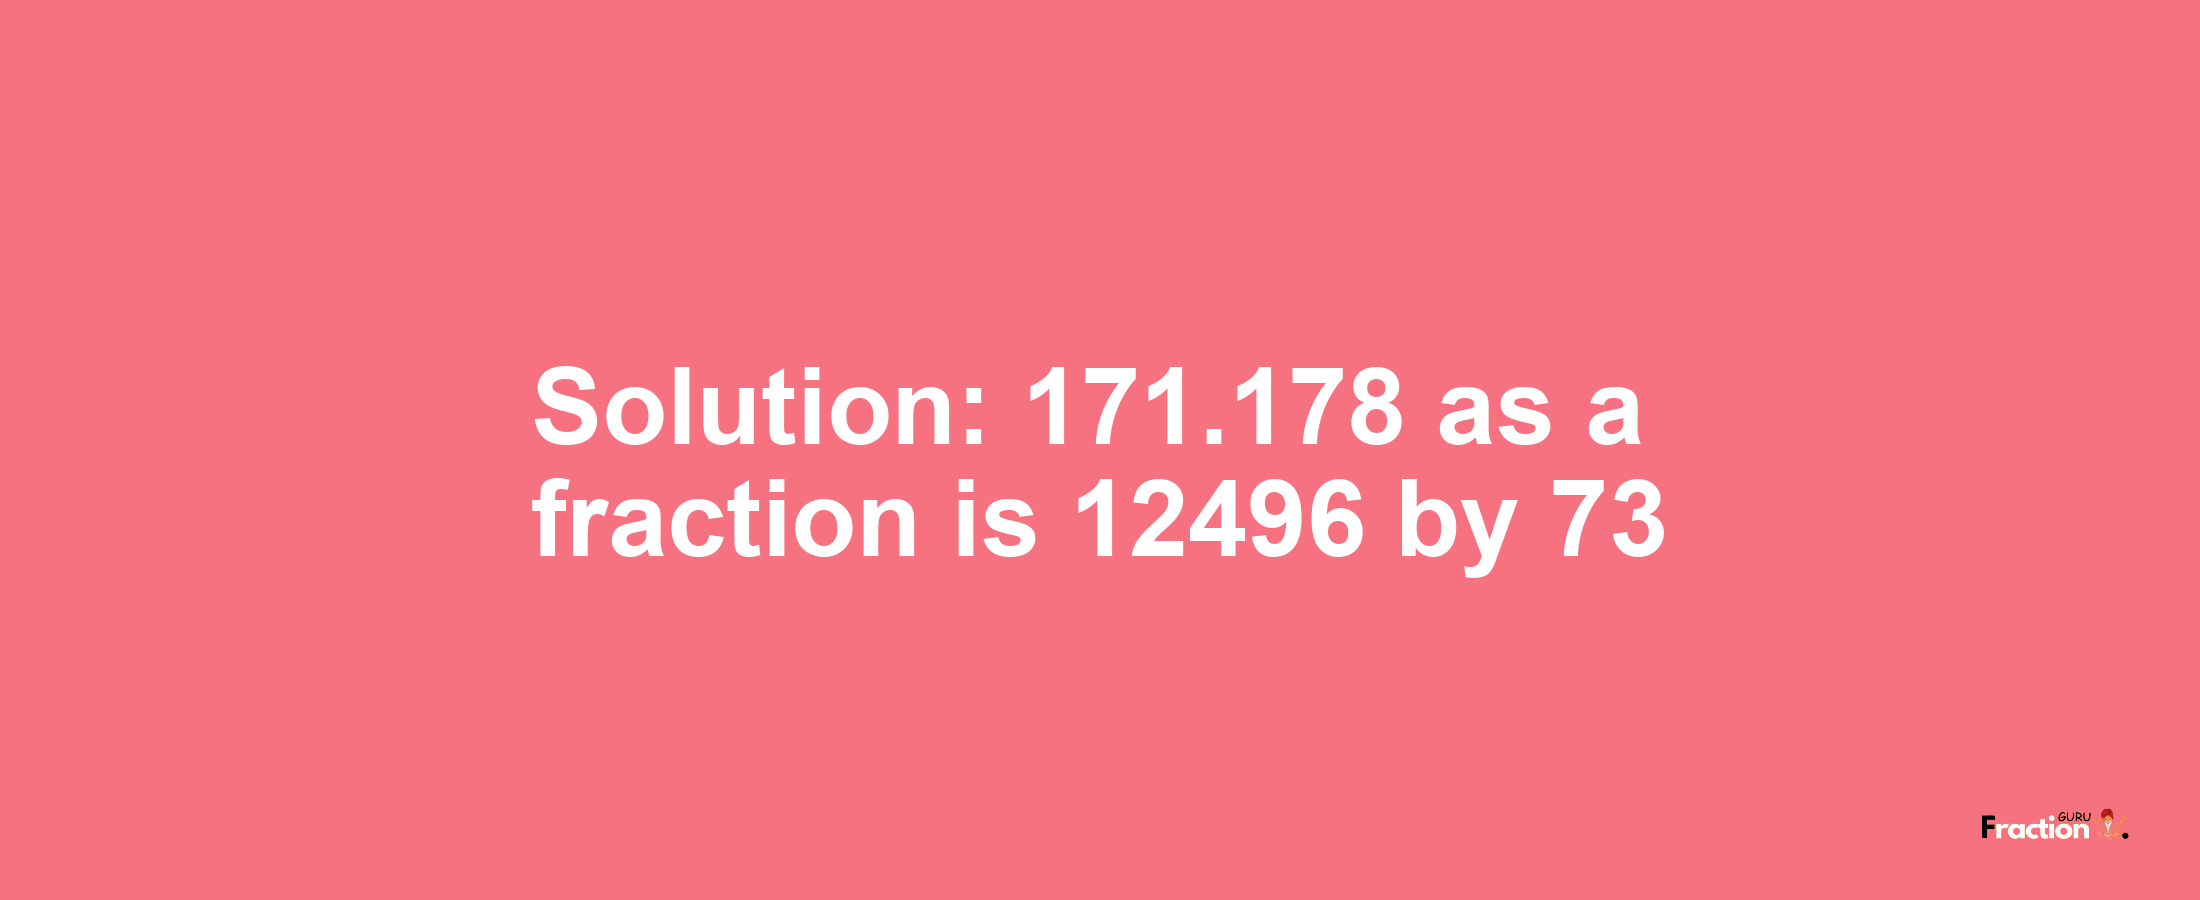 Solution:171.178 as a fraction is 12496/73